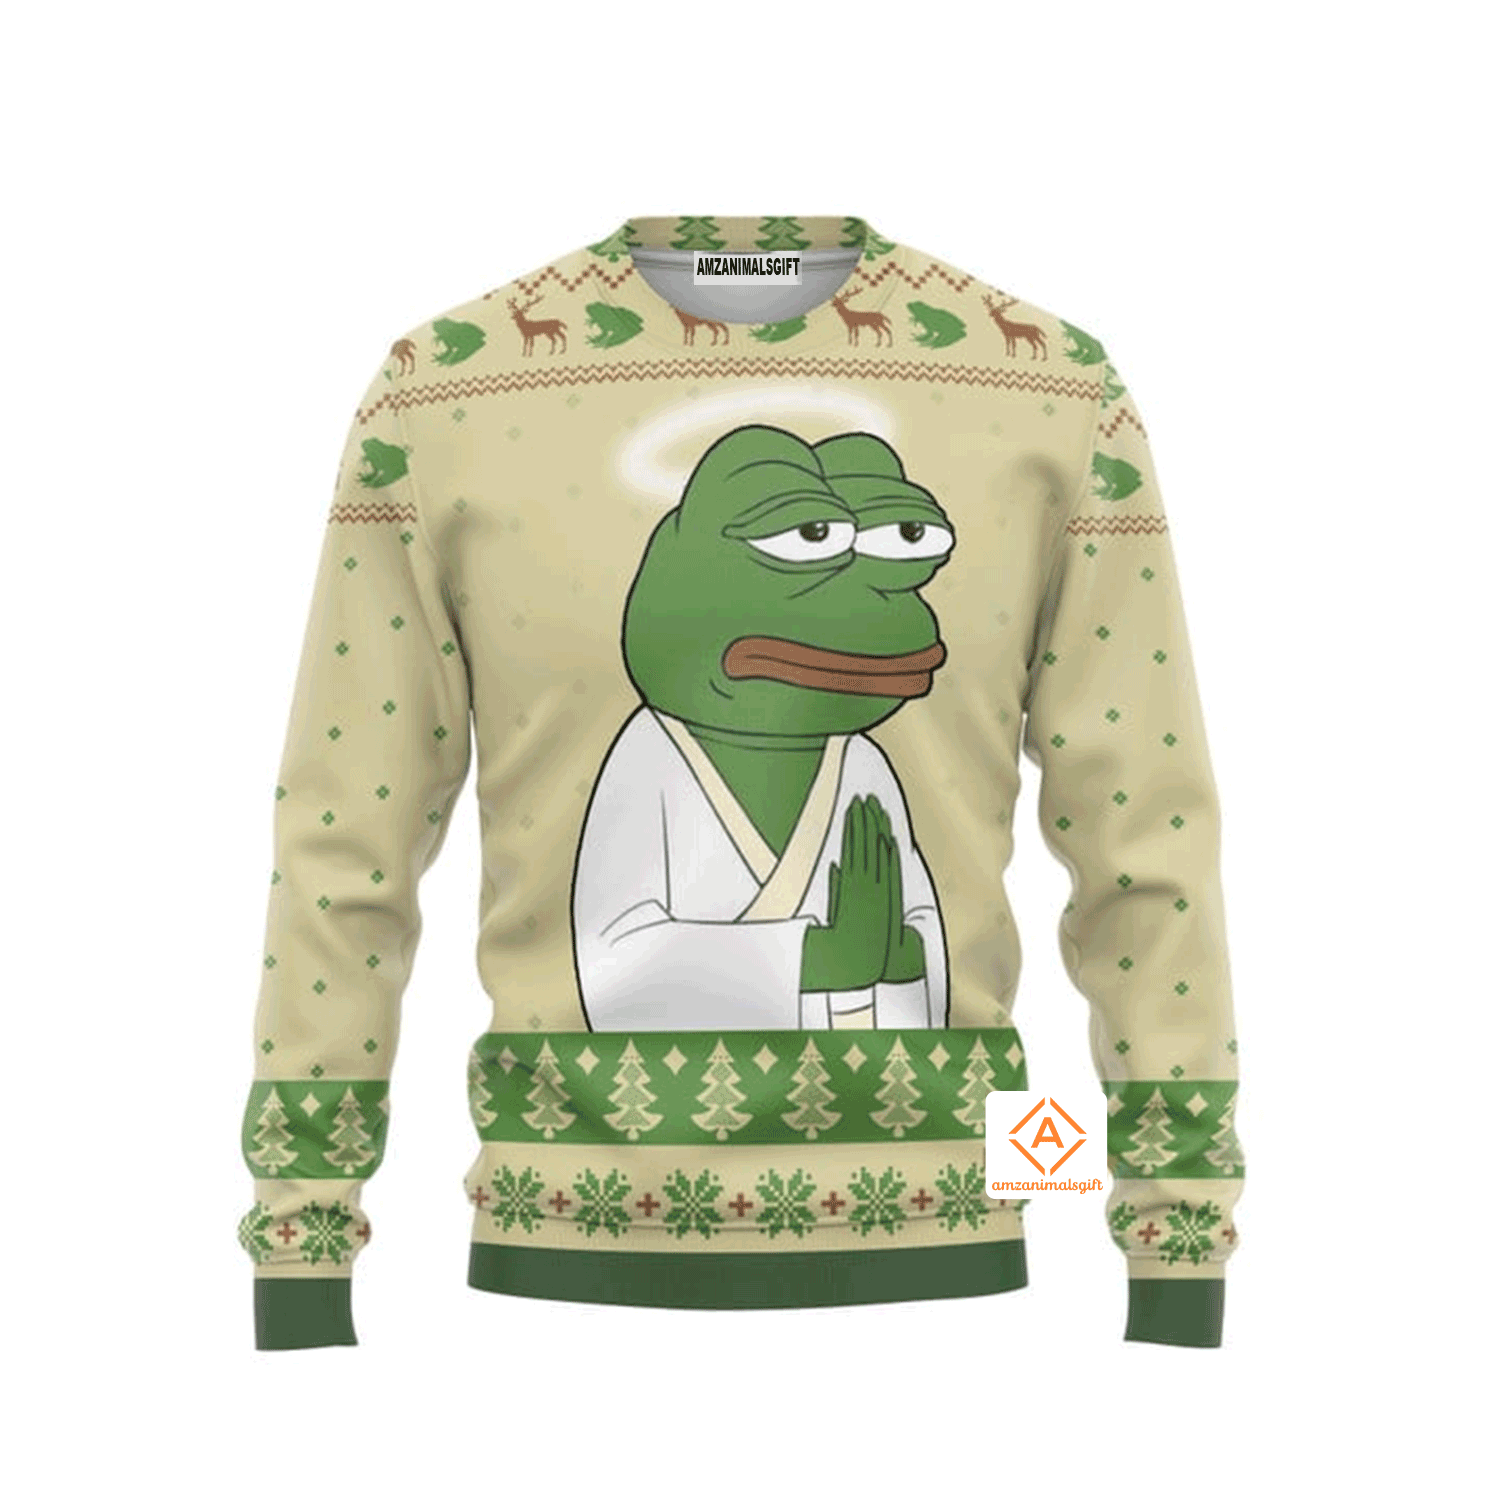 Pepe The Frog Christmas Sweater, Ugly Sweater For Men & Women, Perfect Outfit For Christmas New Year Autumn Winter